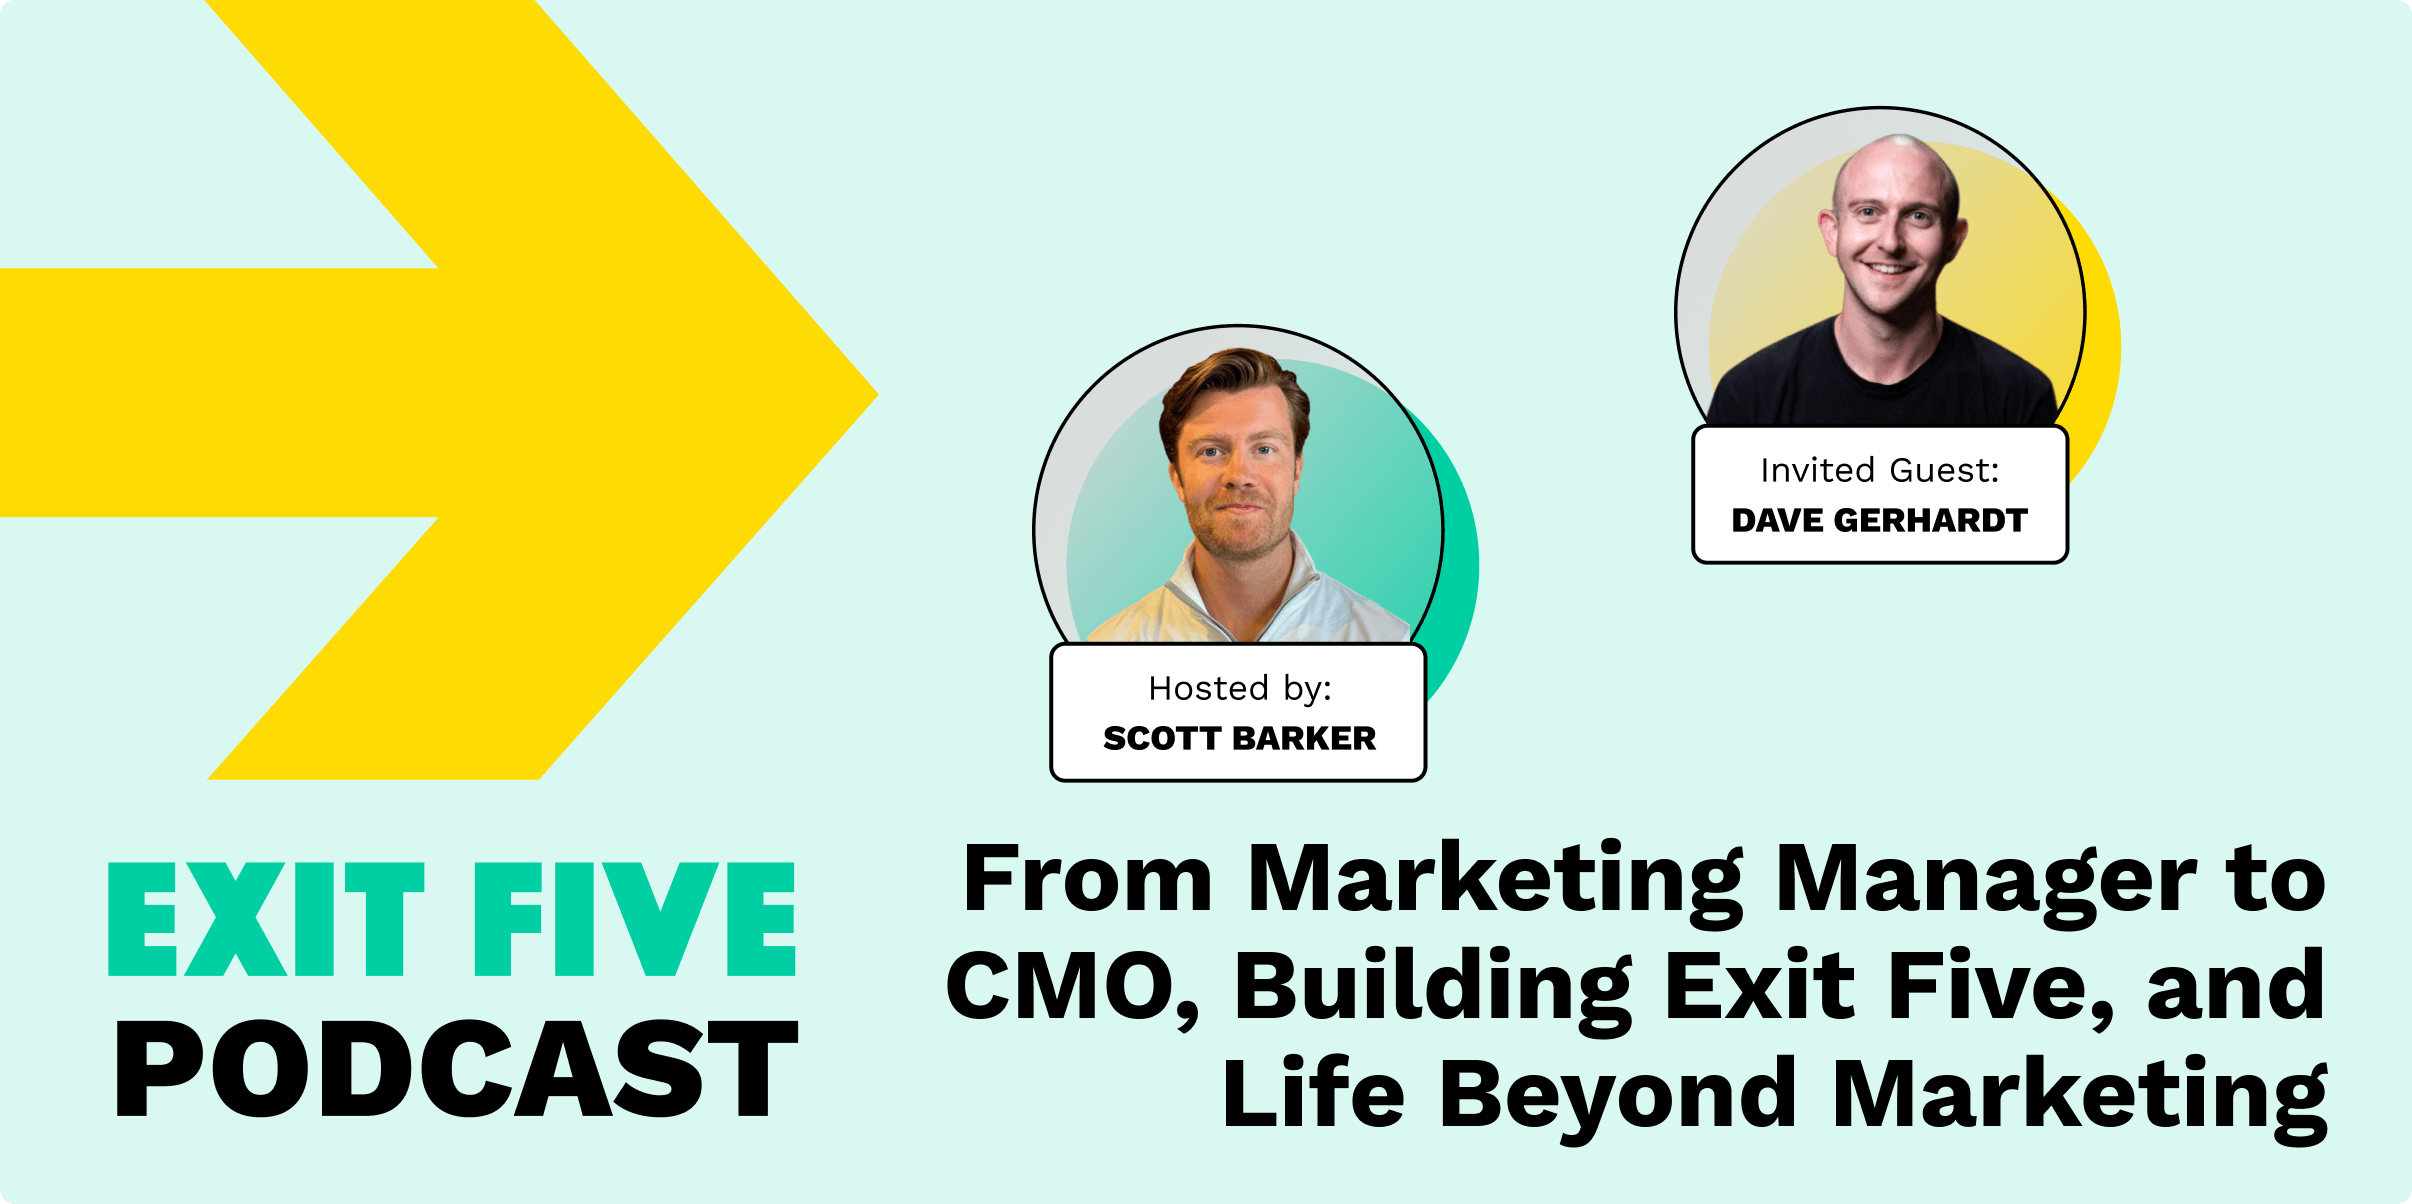 My Story From Marketing Manager to CMO, Building Exit Five, and Life Beyond Marketing